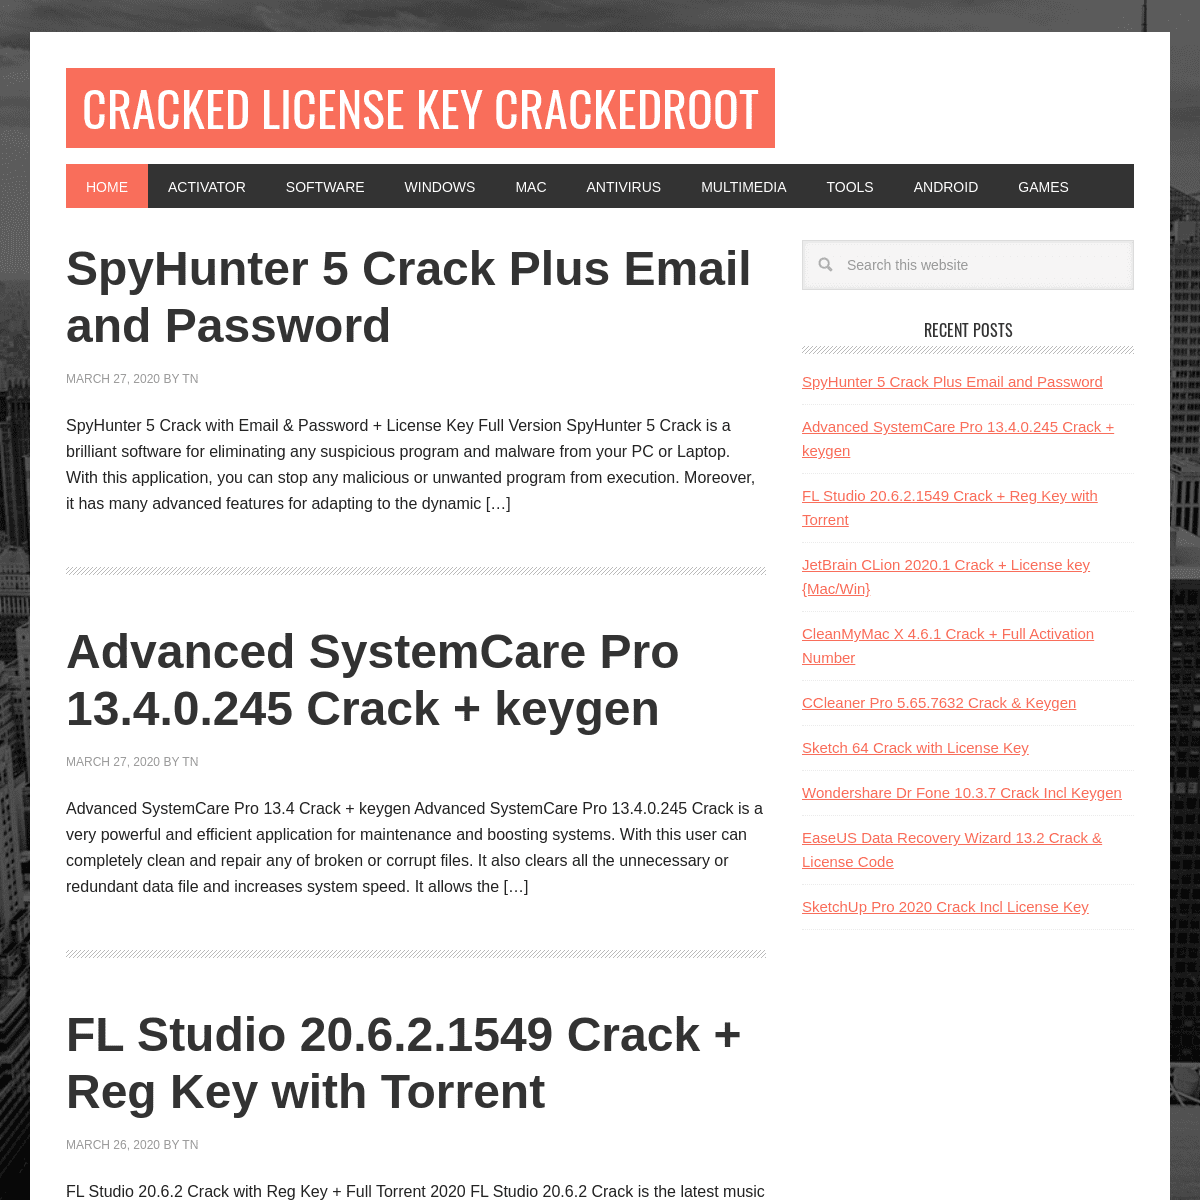 A complete backup of crackedroot.com